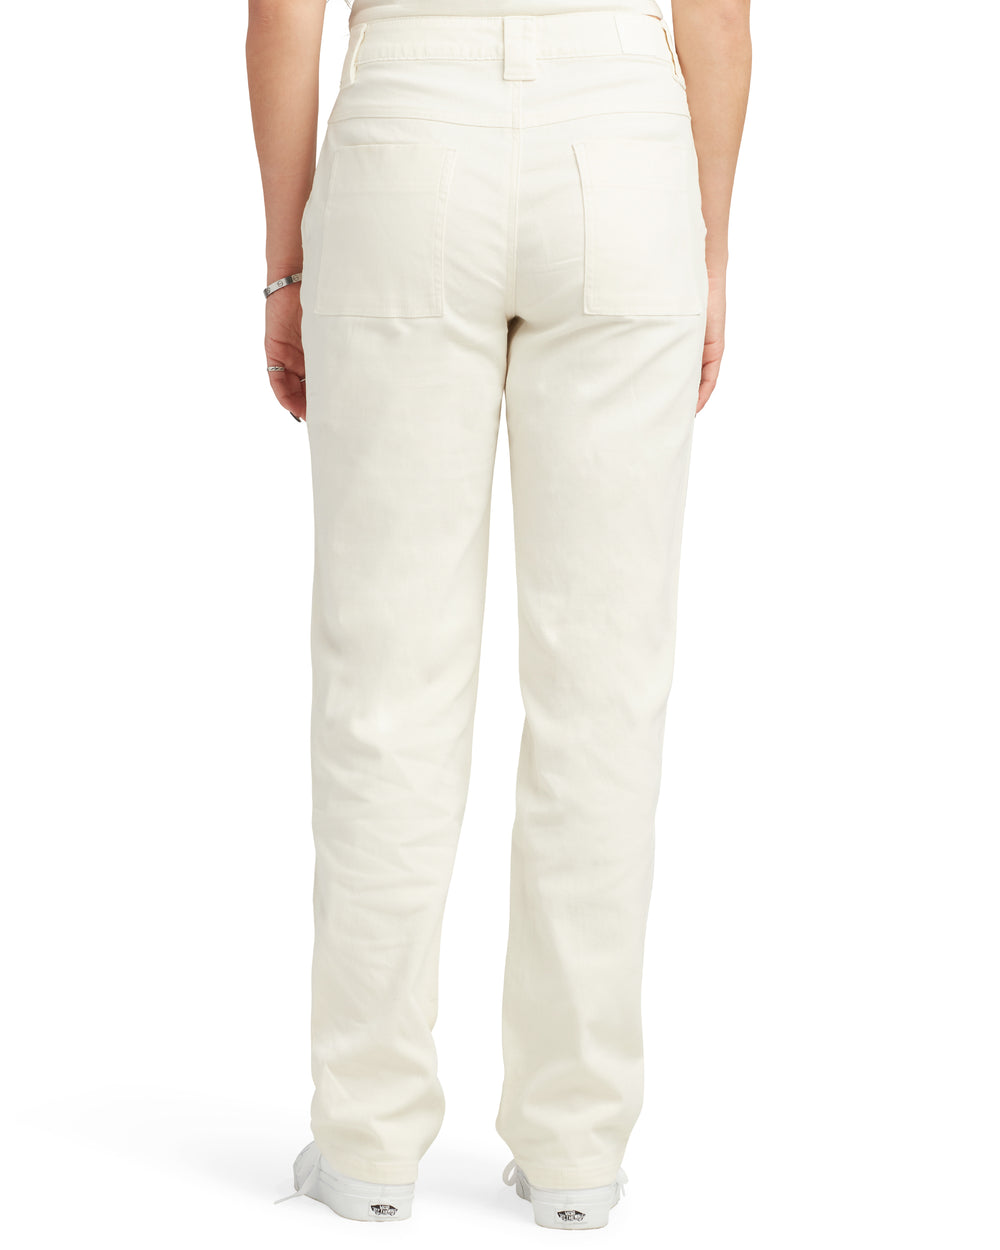 Sandy Mid Rise Relaxed Fit Pant - Cream